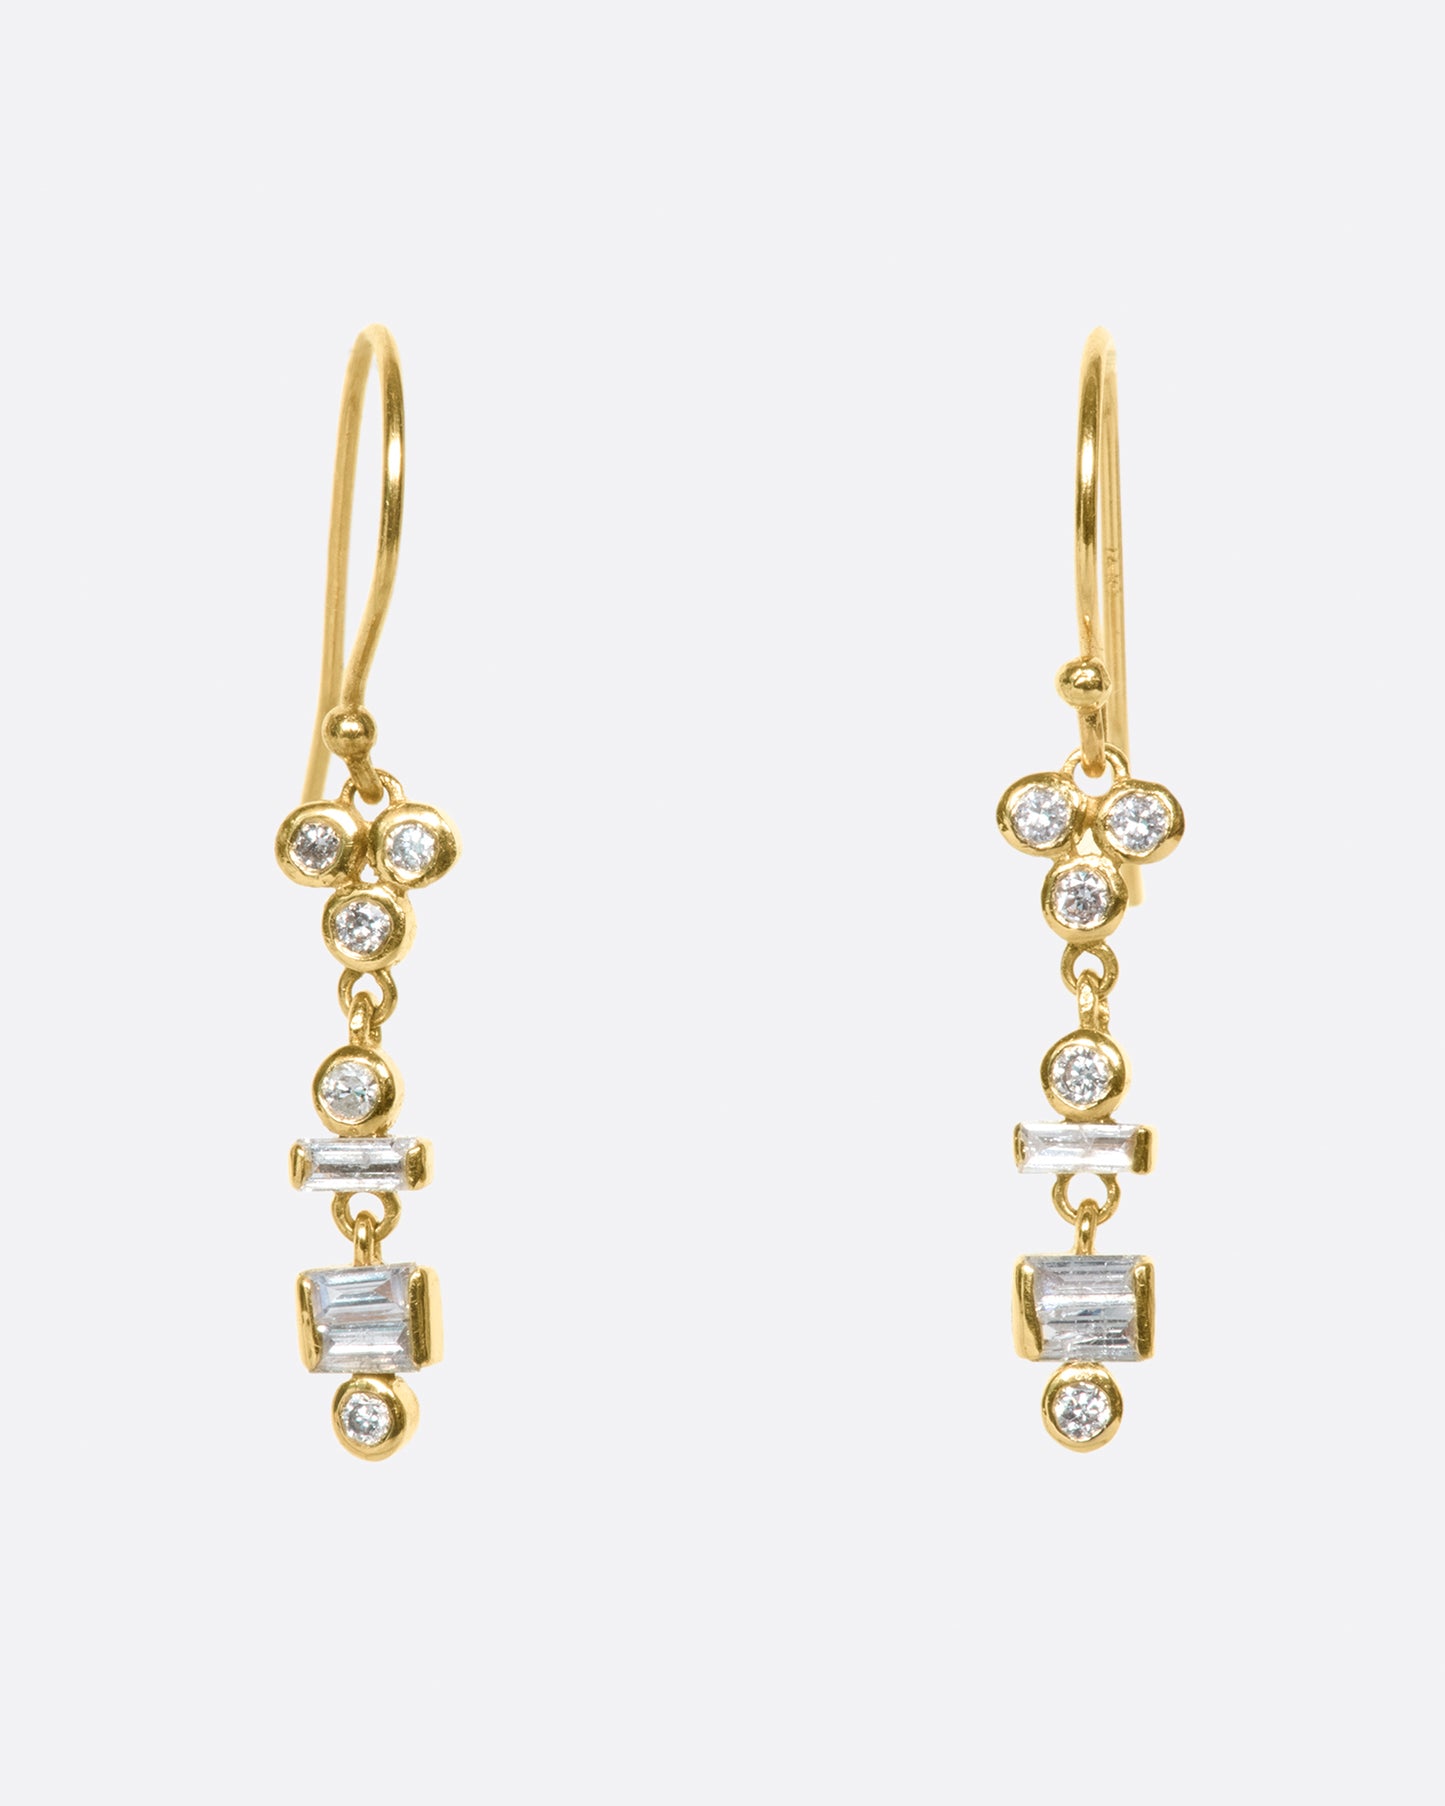 A pair of diamond totem drop earrings with layers of round and diamond baguettes.